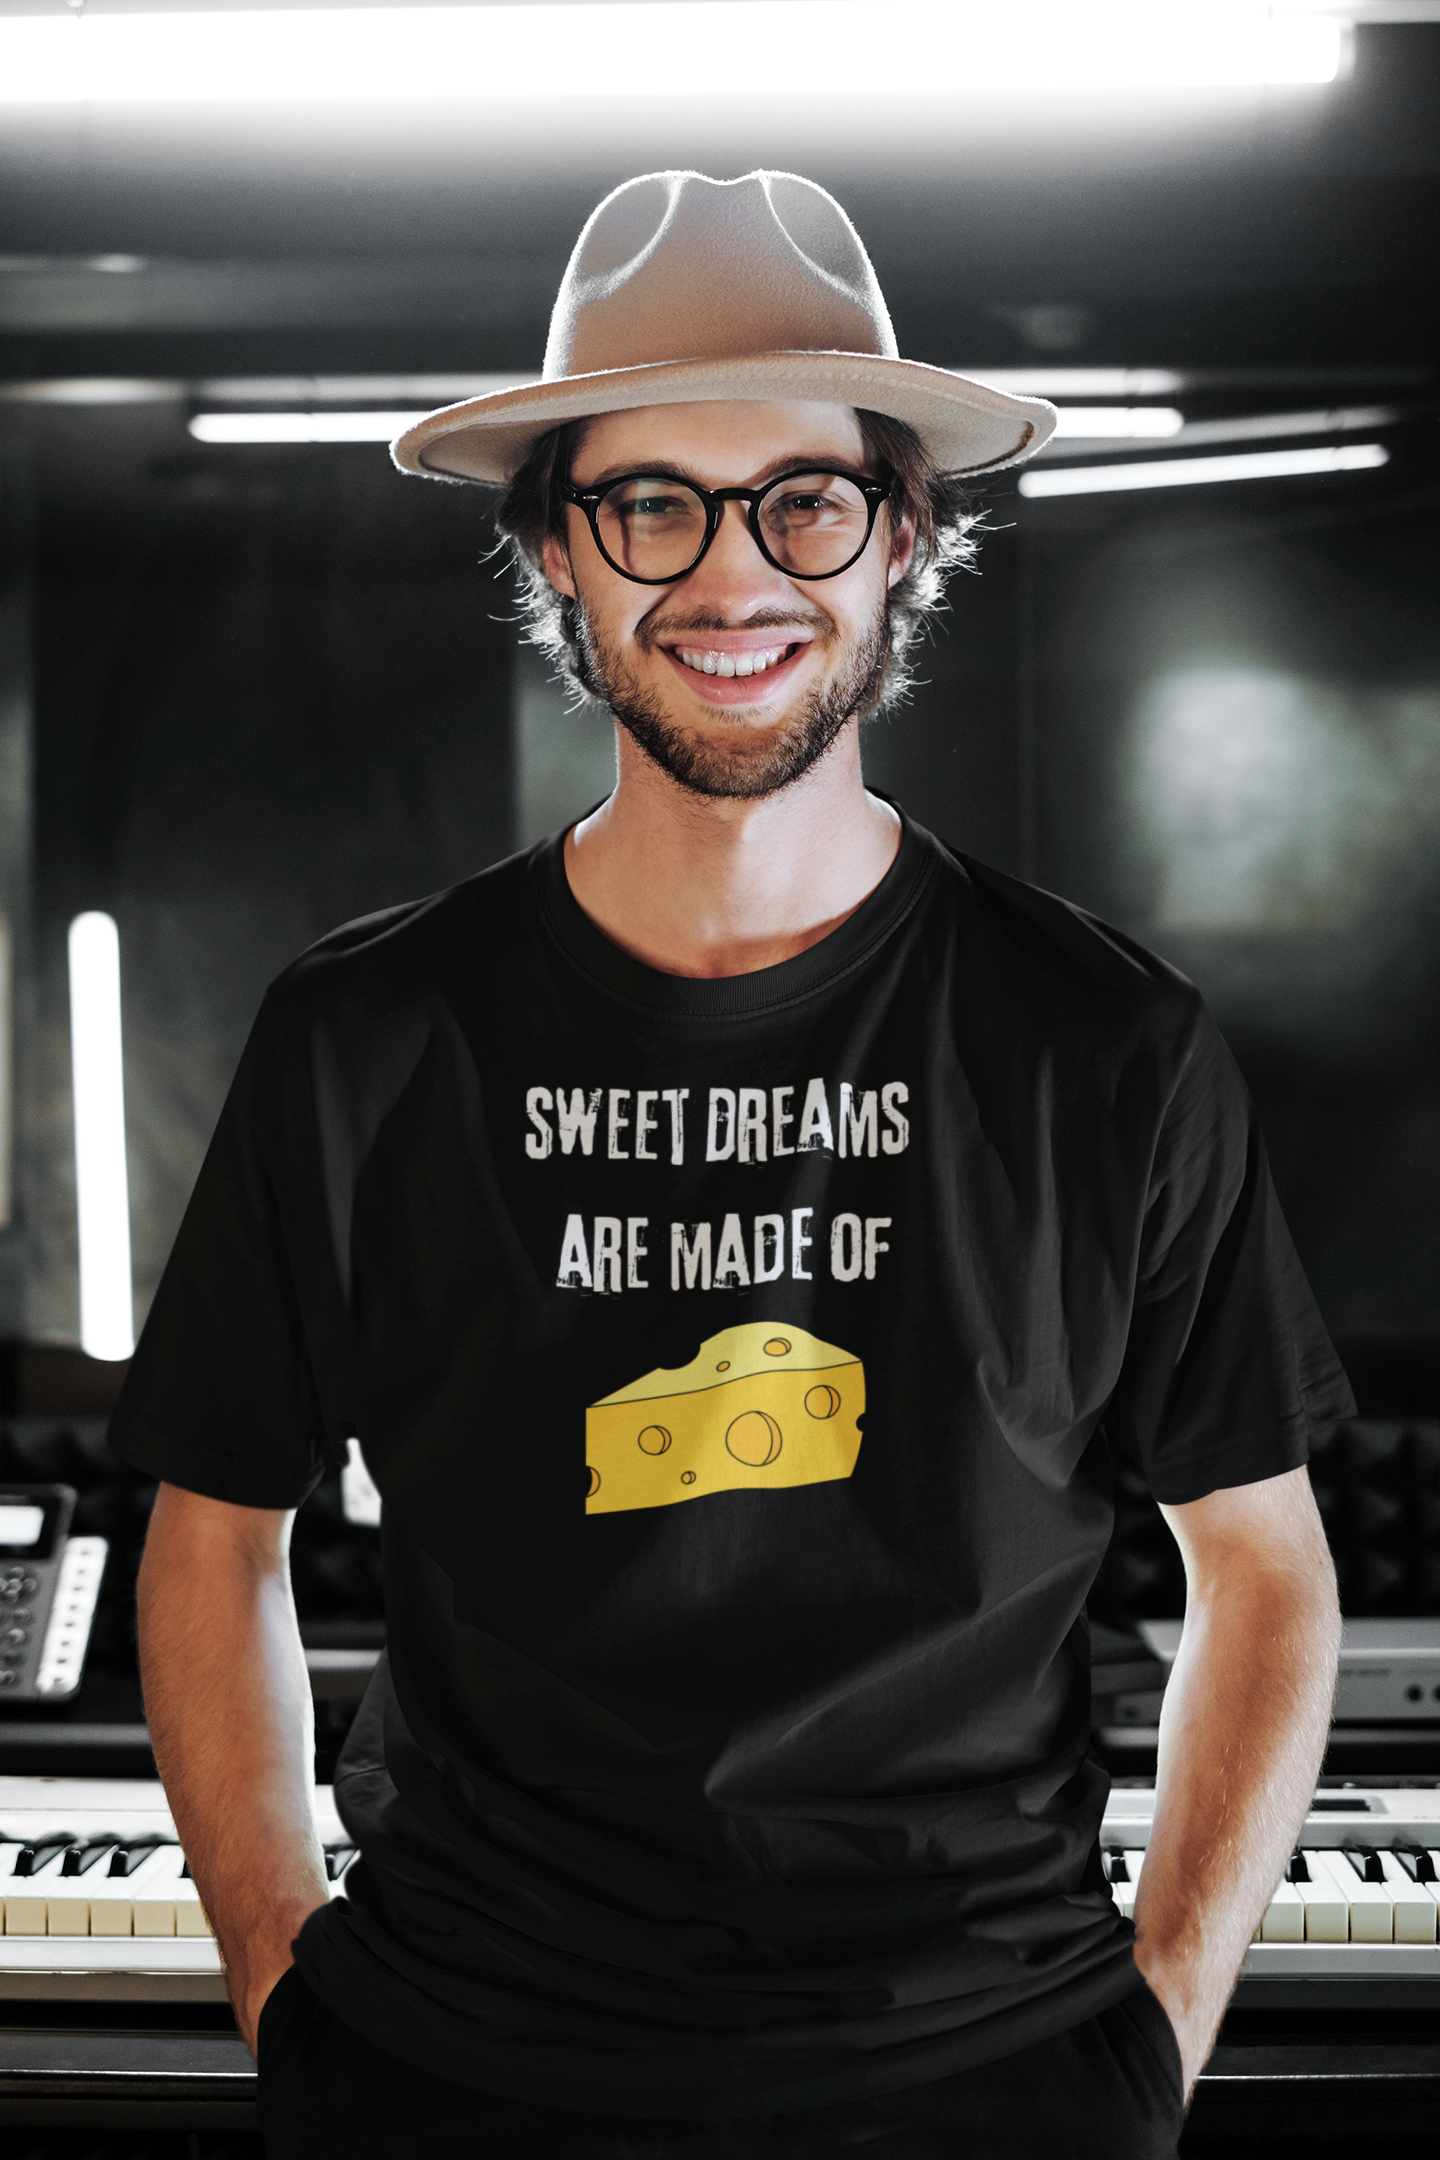 Bilkool Sweet Dreams Are Made Of Cotton Half Sleeve T-Shirt